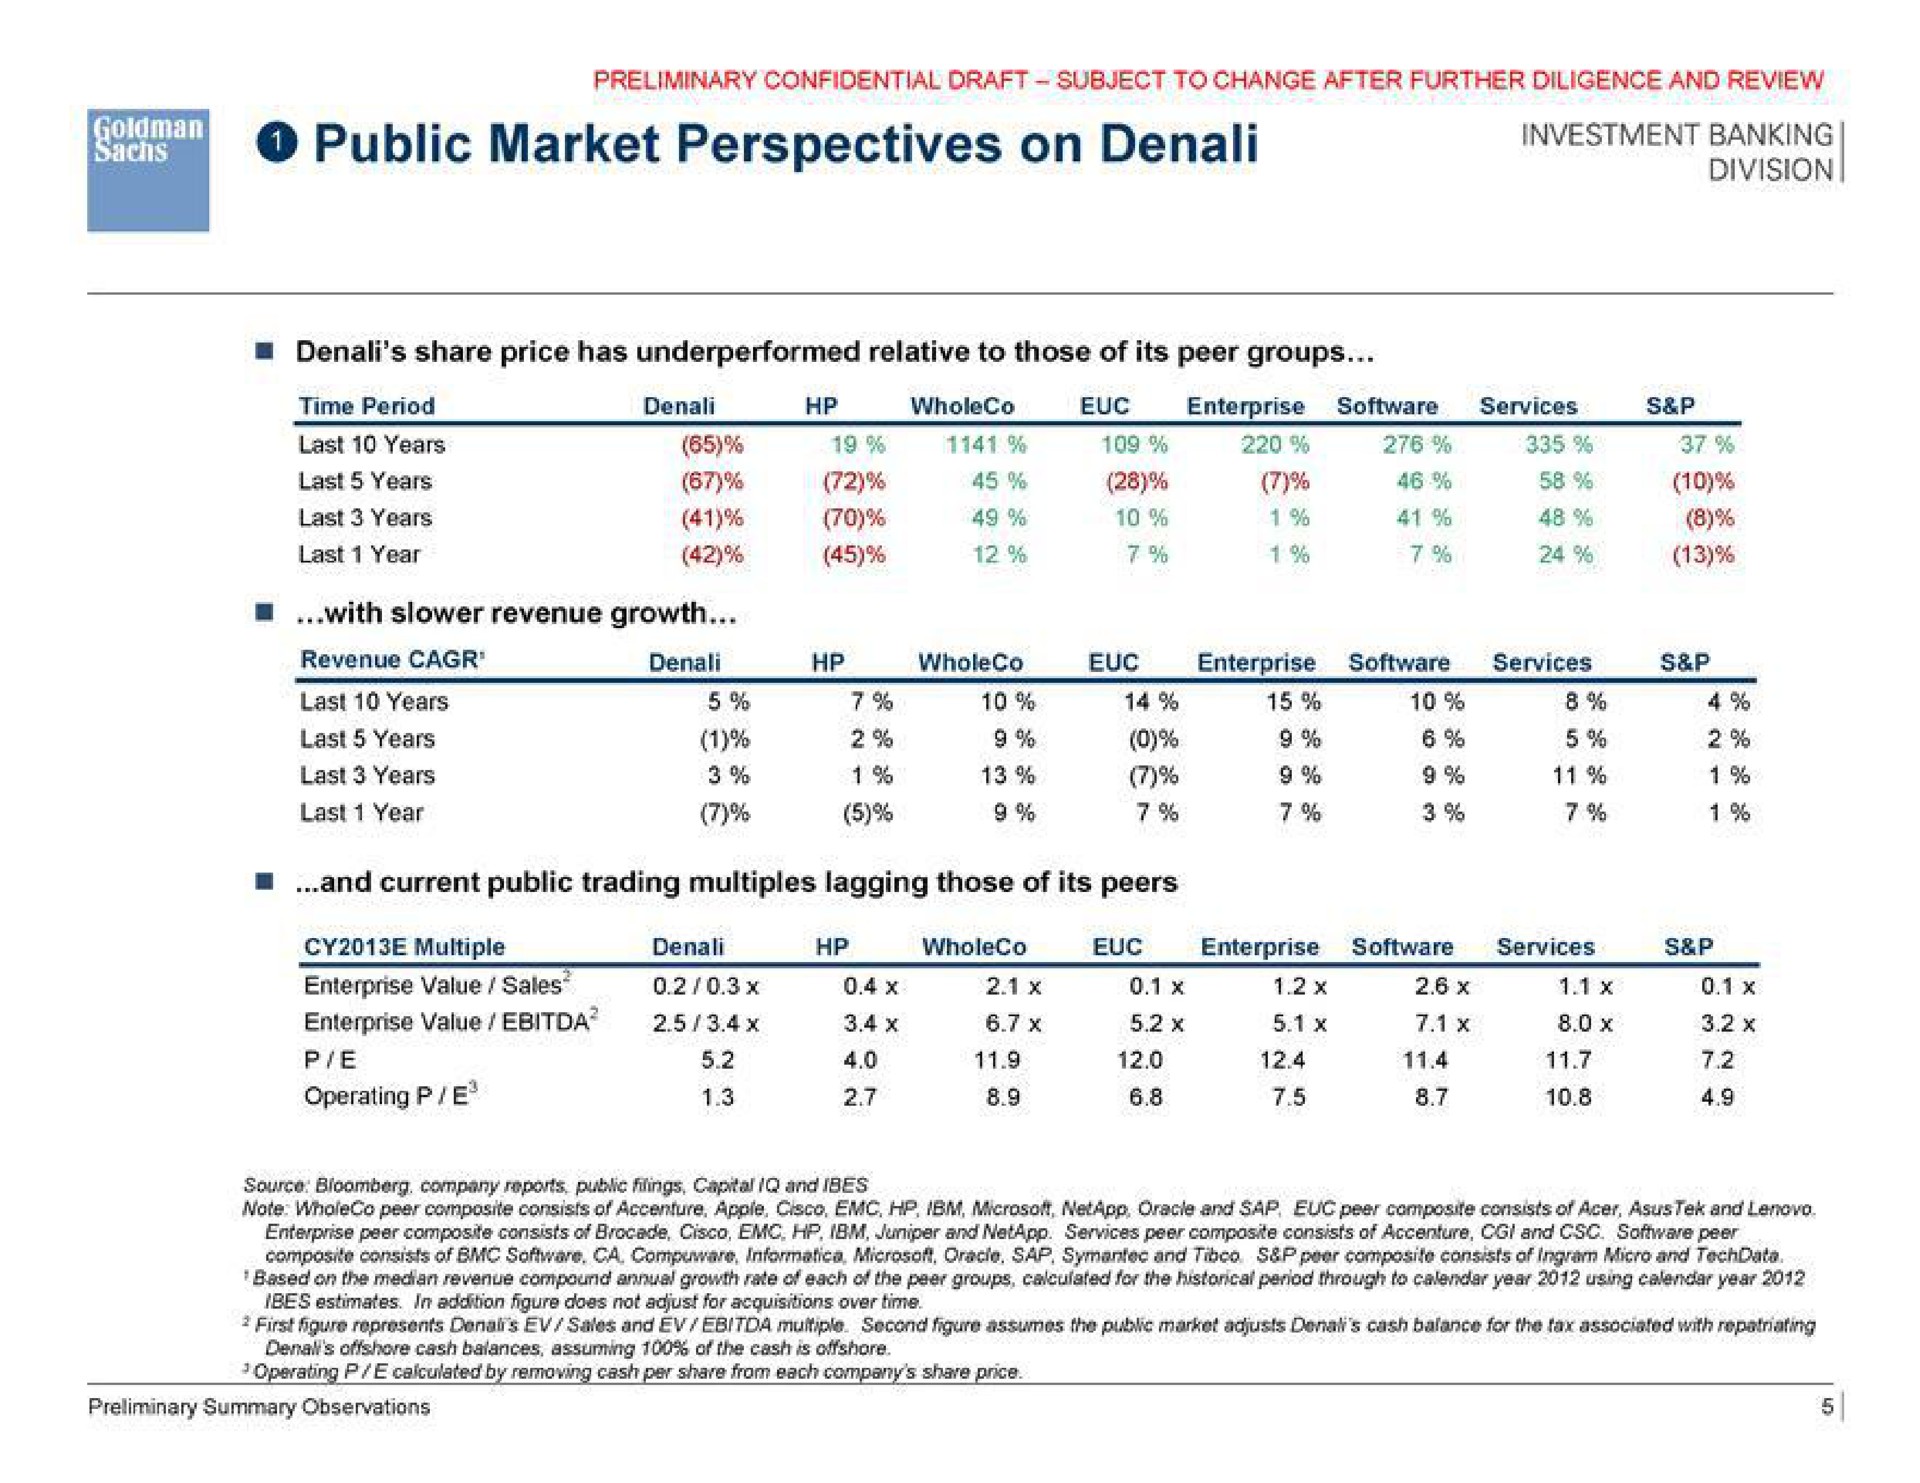 public market perspectives on investment banking | Goldman Sachs